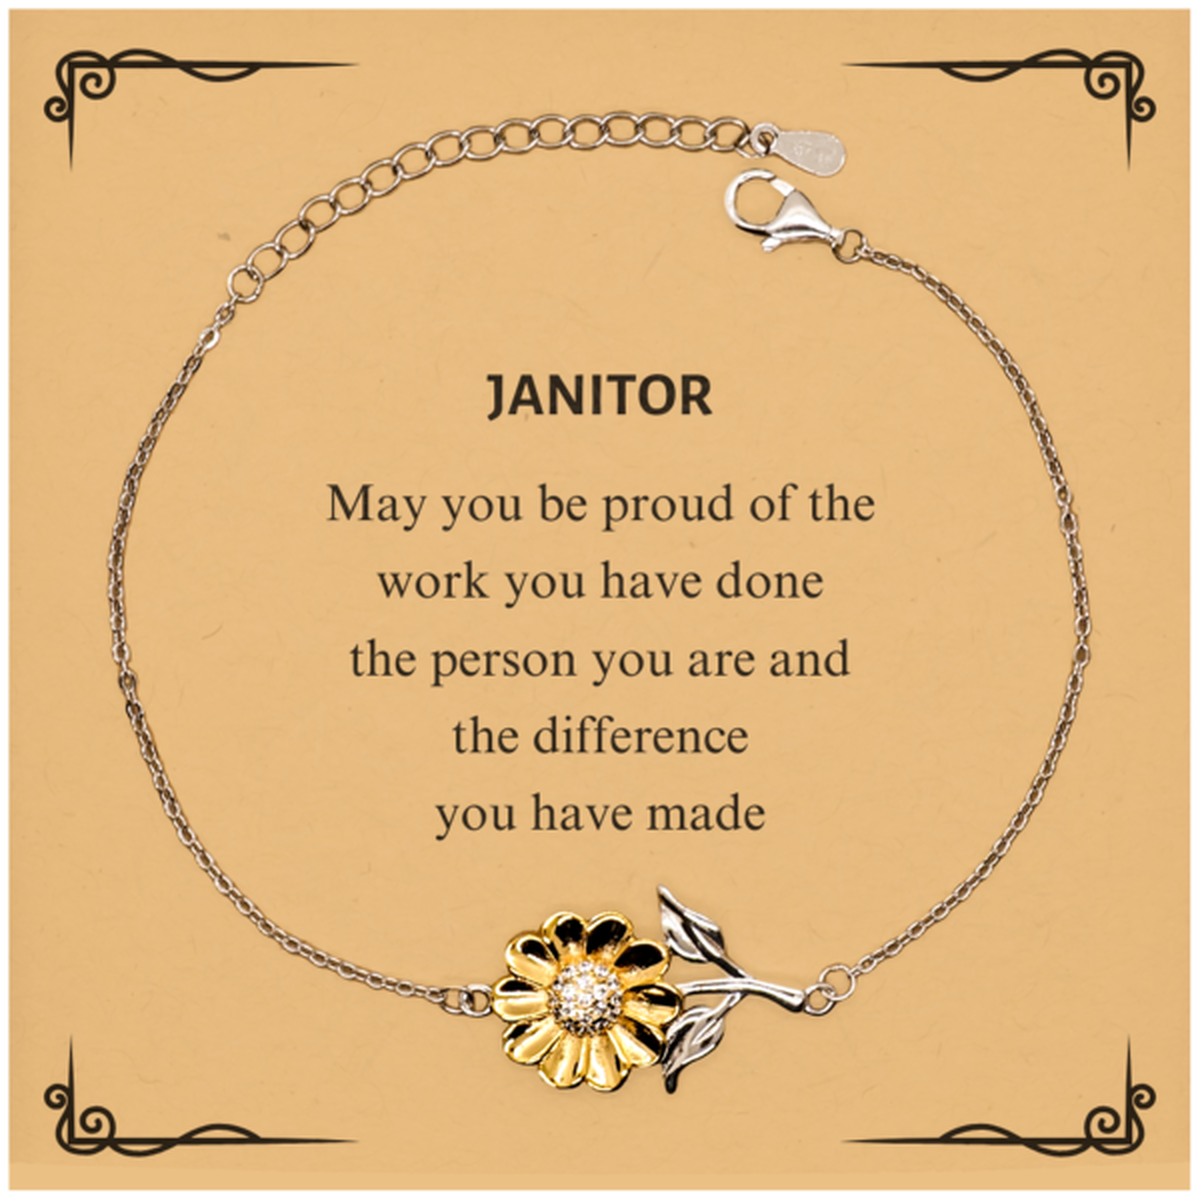 Janitor May you be proud of the work you have done, Retirement Janitor Sunflower Bracelet for Colleague Appreciation Gifts Amazing for Janitor